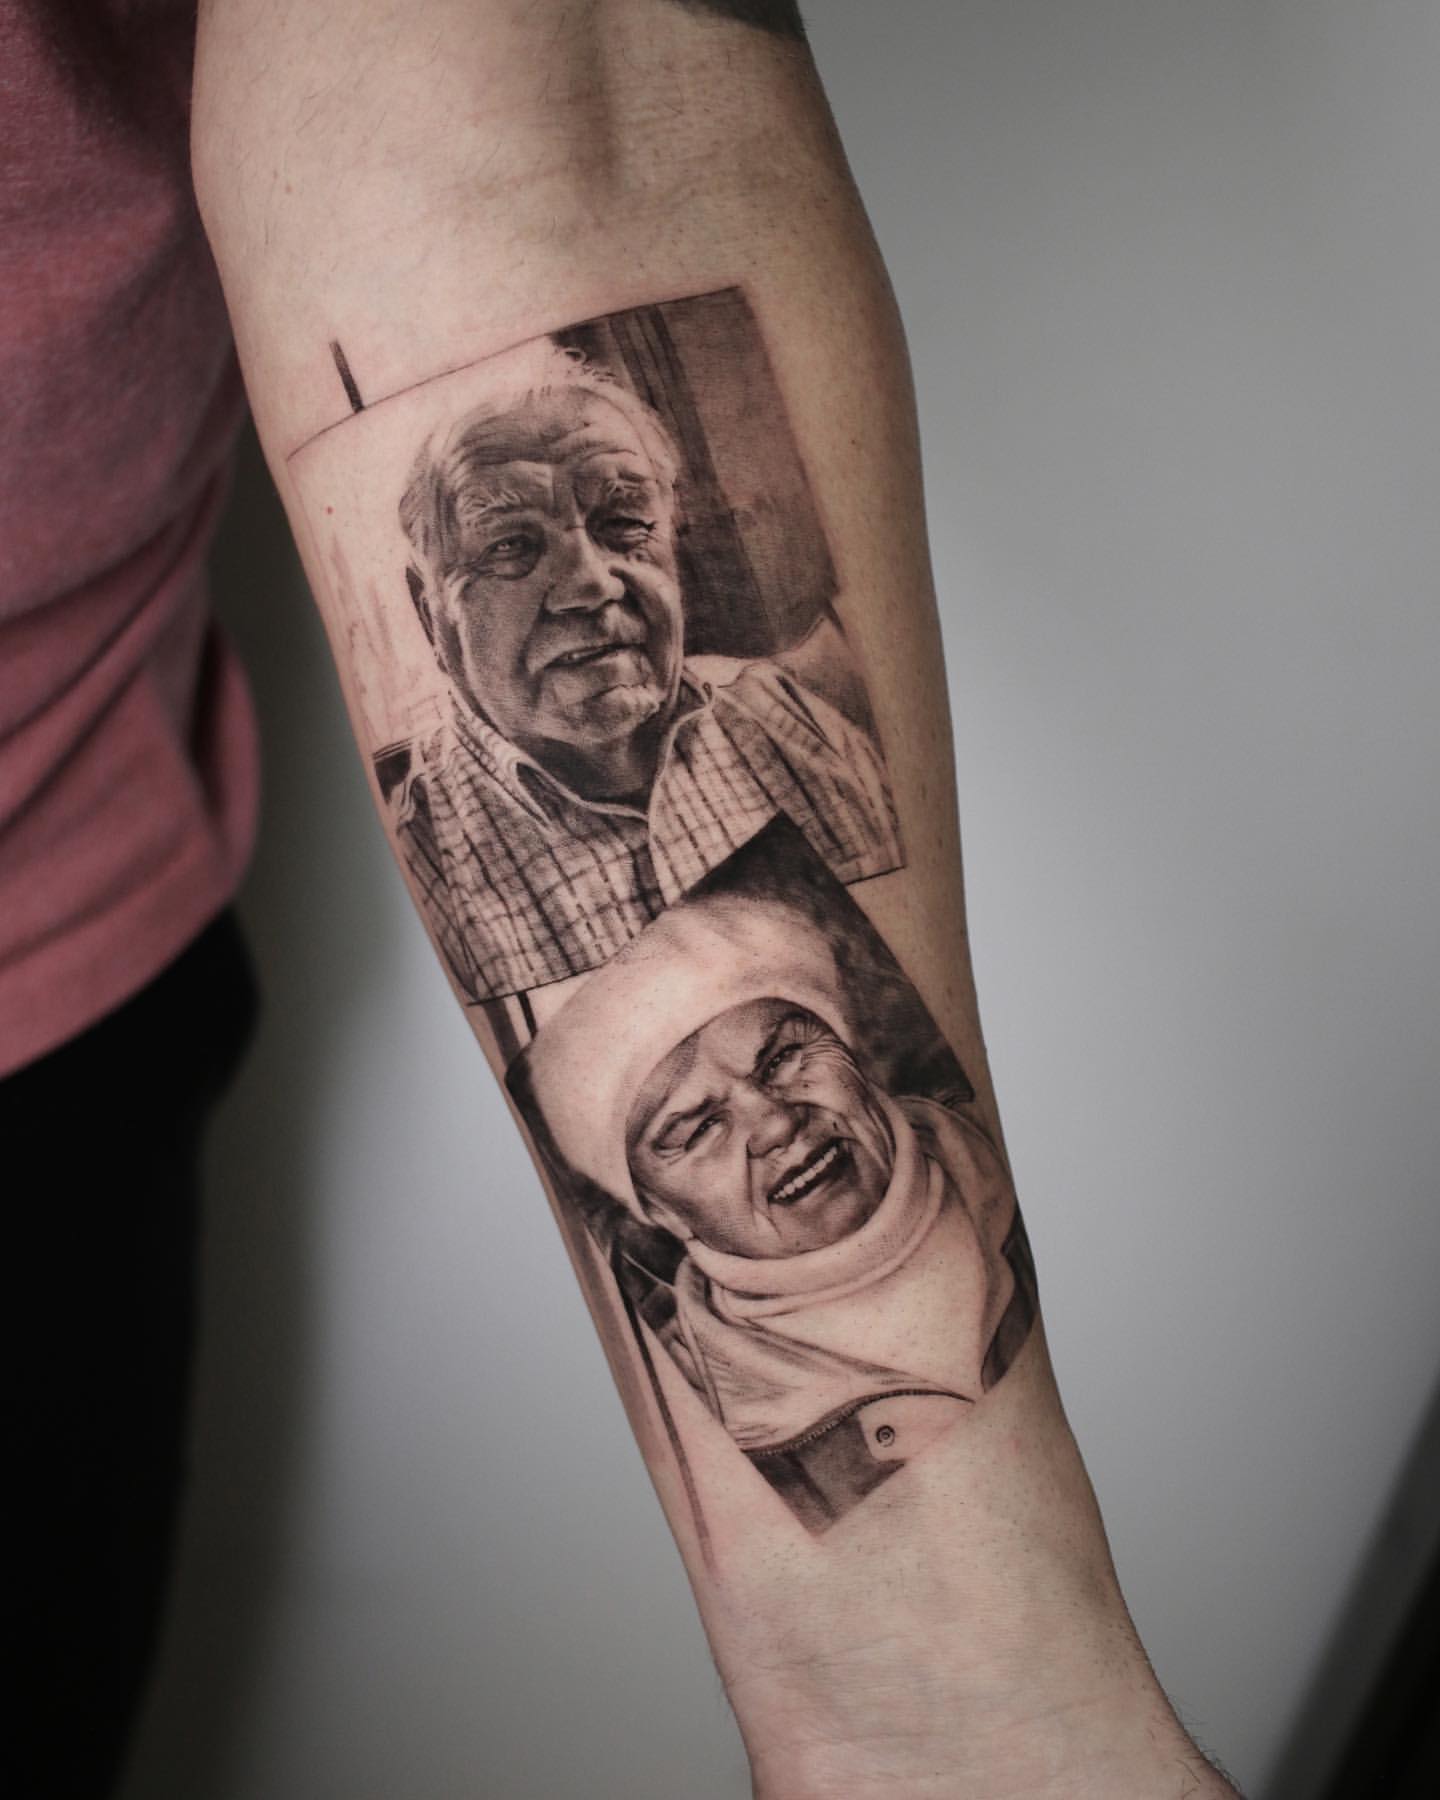 Tattoo uploaded by By_JN_Customs_(By Appointment Only) • Family heartbeat  tattoo on forearm... • Tattoodo